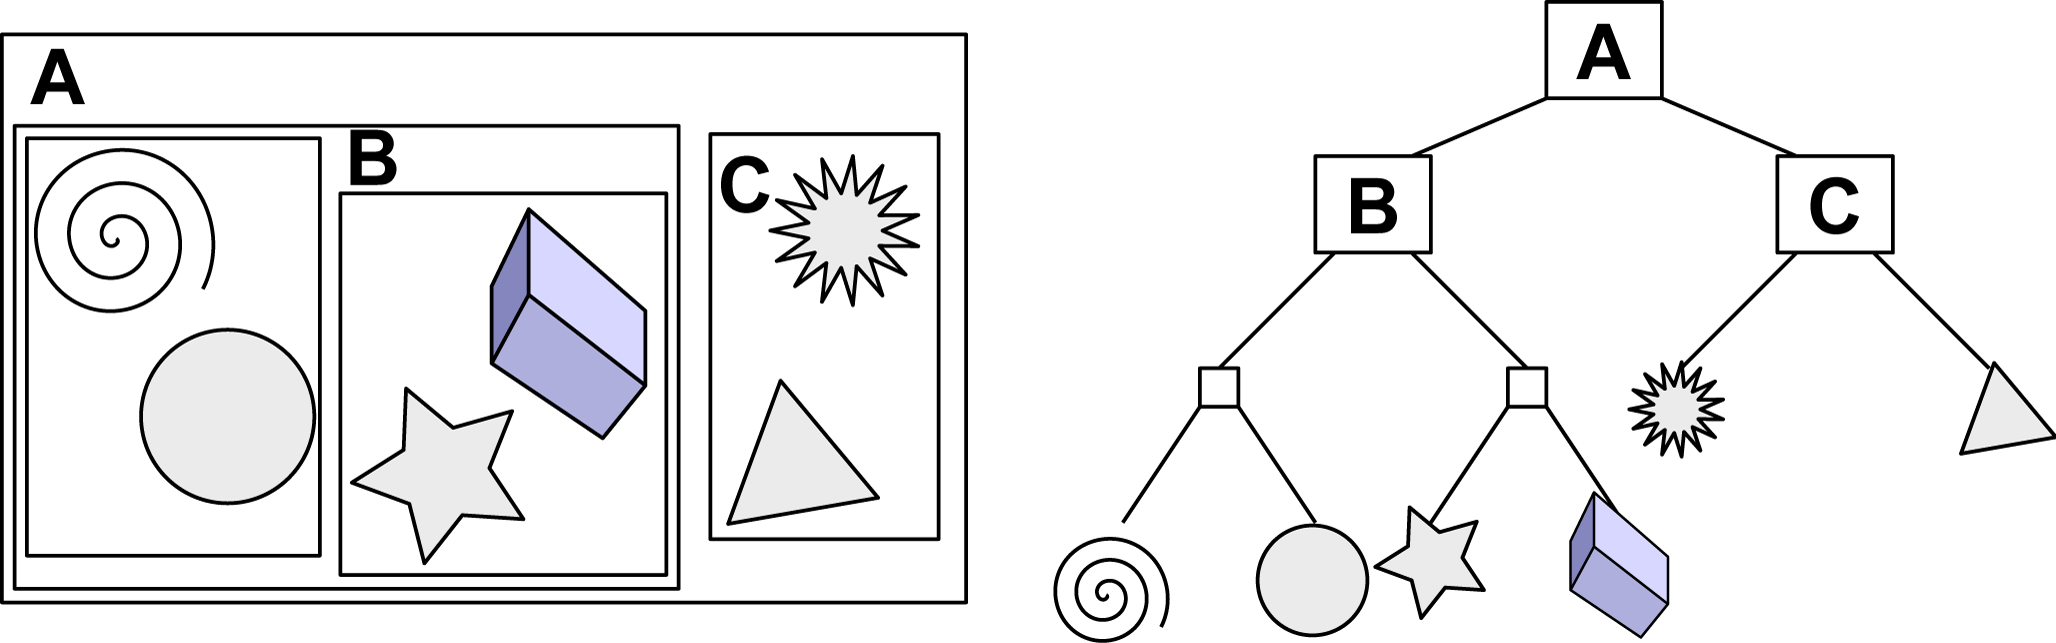 In the "scene" on the left, there are six objects. All objects fit into the axis-aligned bounding box A (the root of the tree), then we cluster nearby objects into subtrees rooted at B and C. We continue to apply this process recursively until leaves of the tree store a single object. Tree shown on right. (image source)